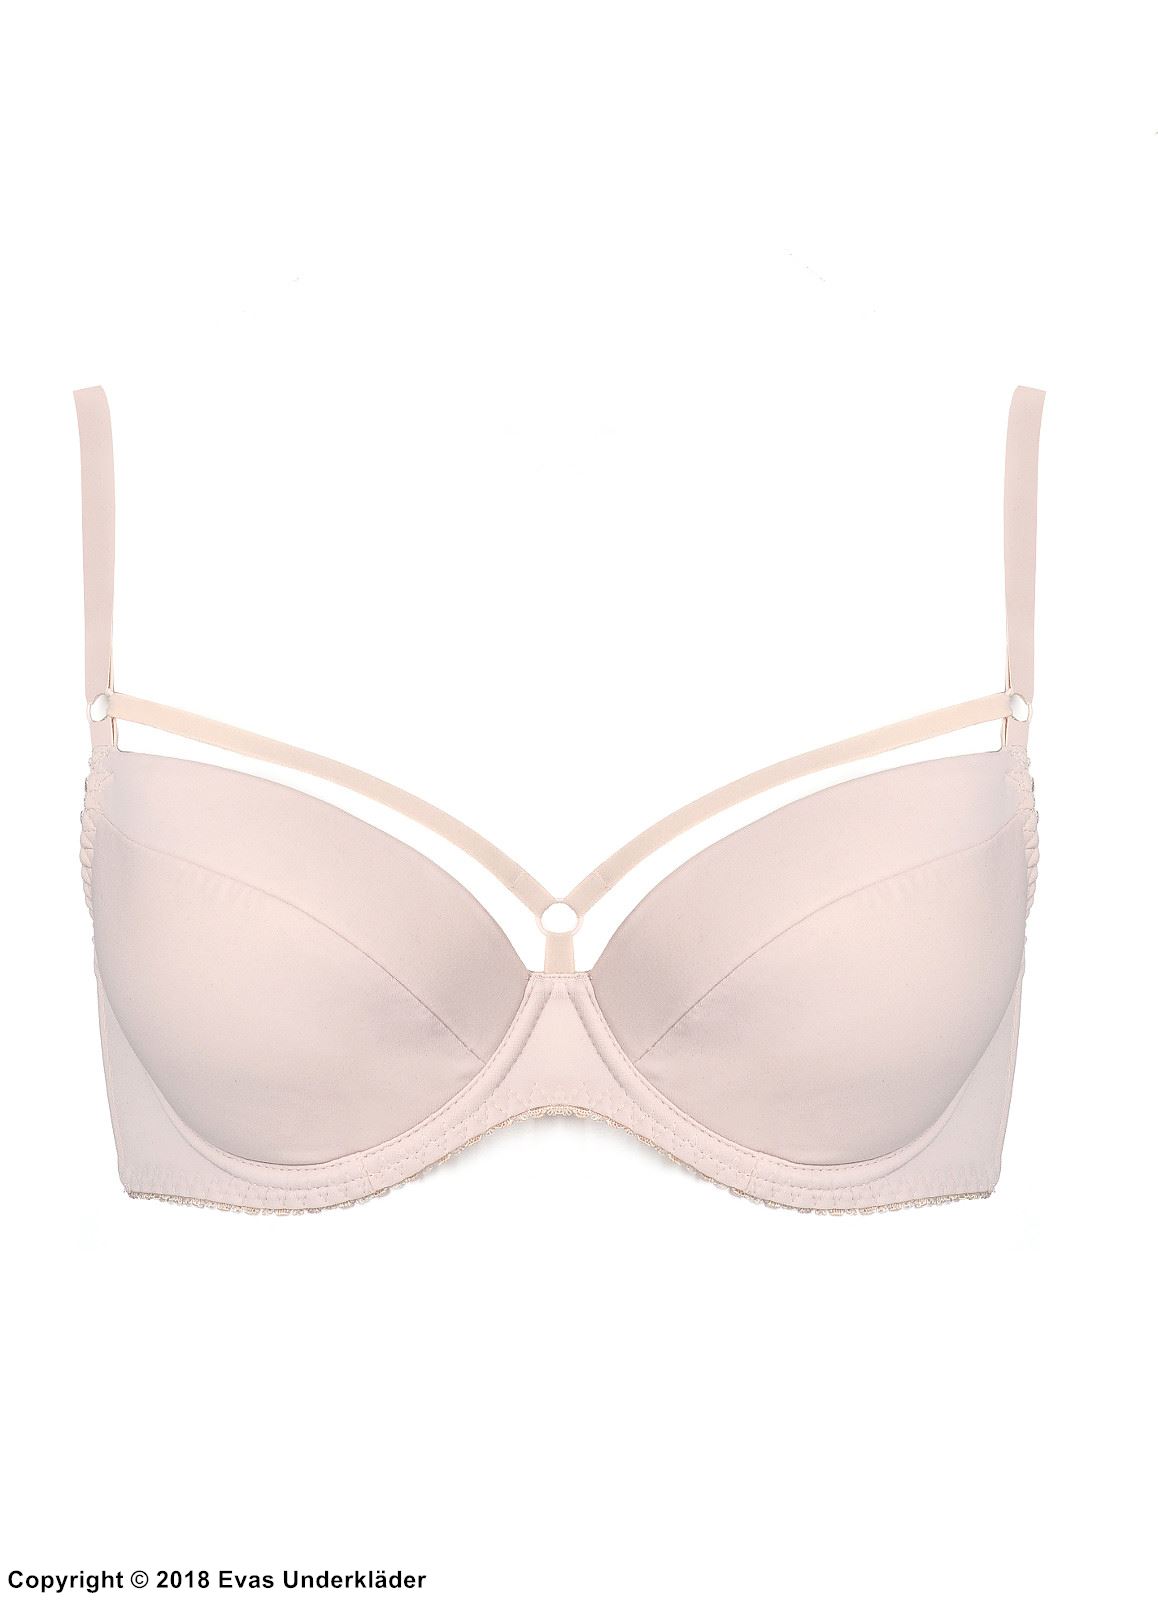 Push-up bra, straps over bust